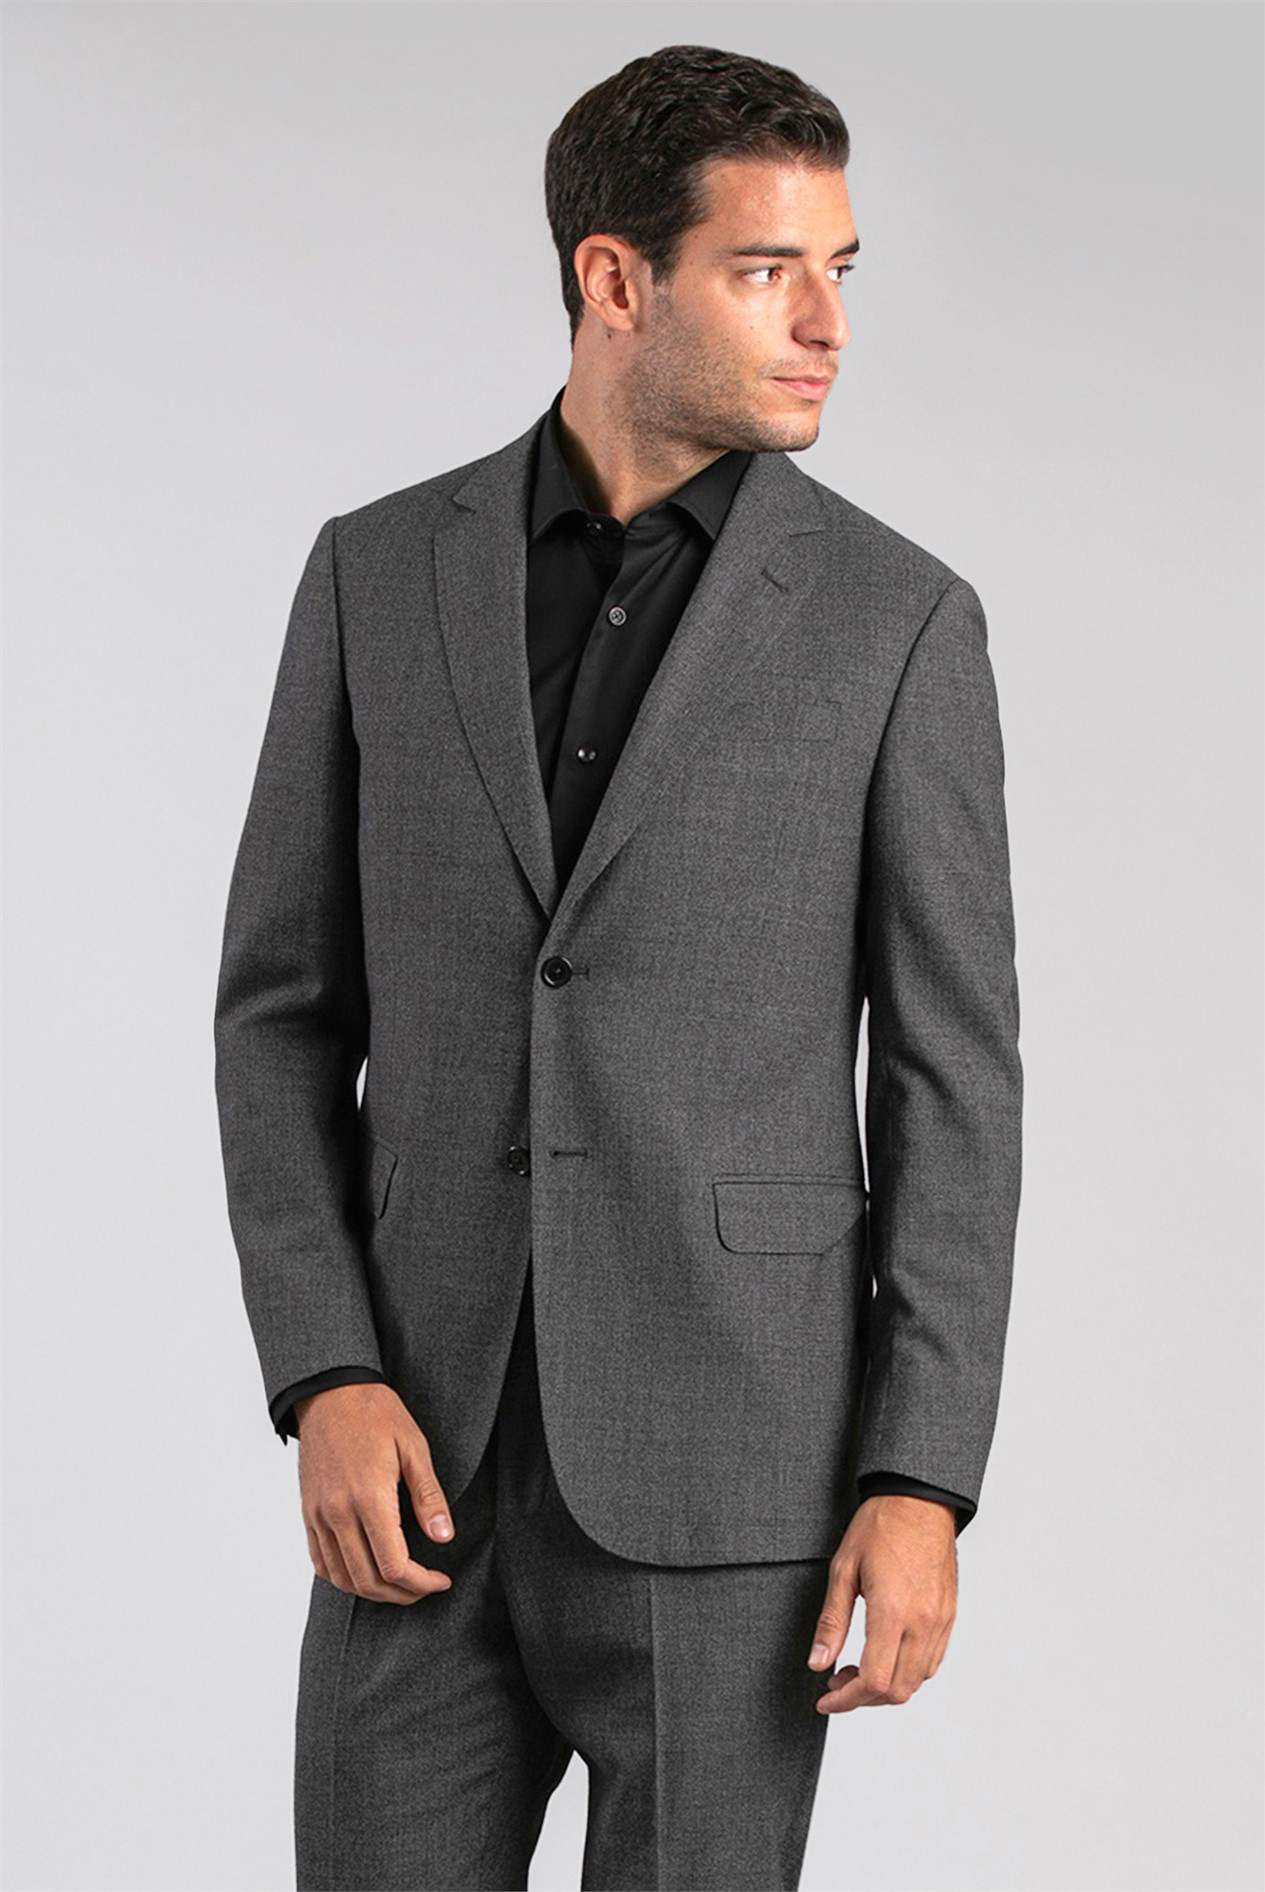 Wearing a grey suit with a black dress shirt